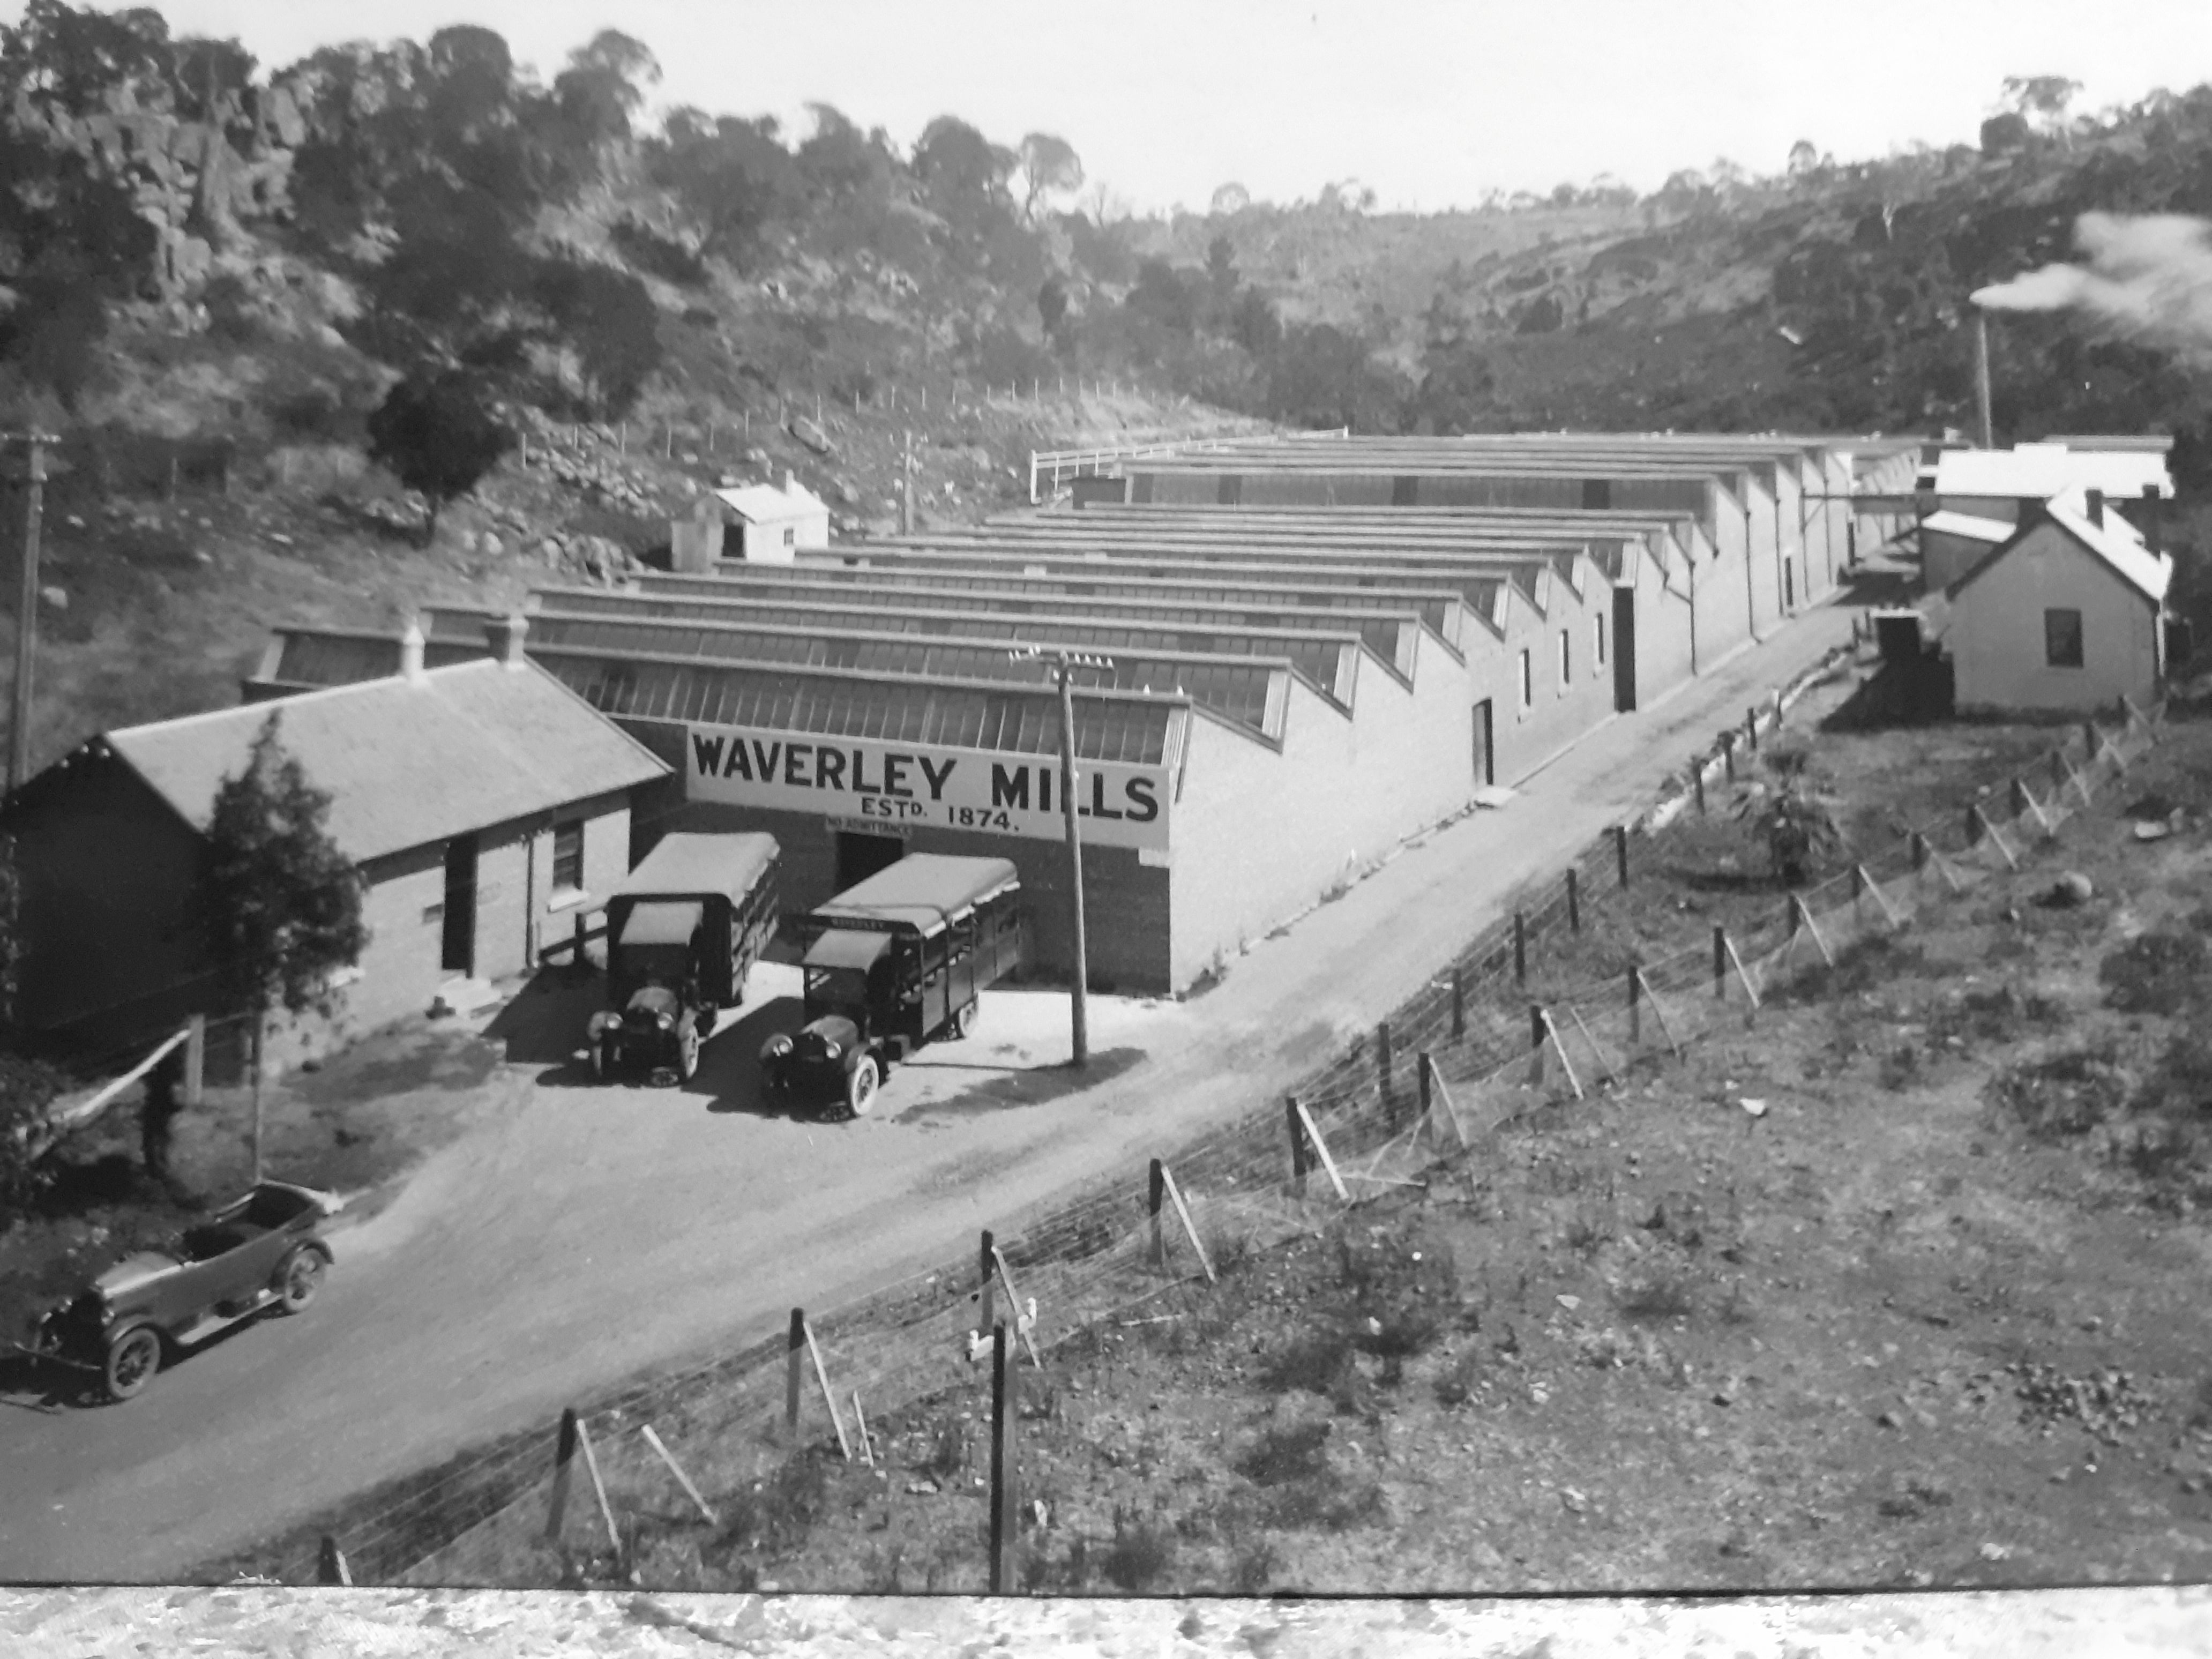 Historic image of the mill in black and white.